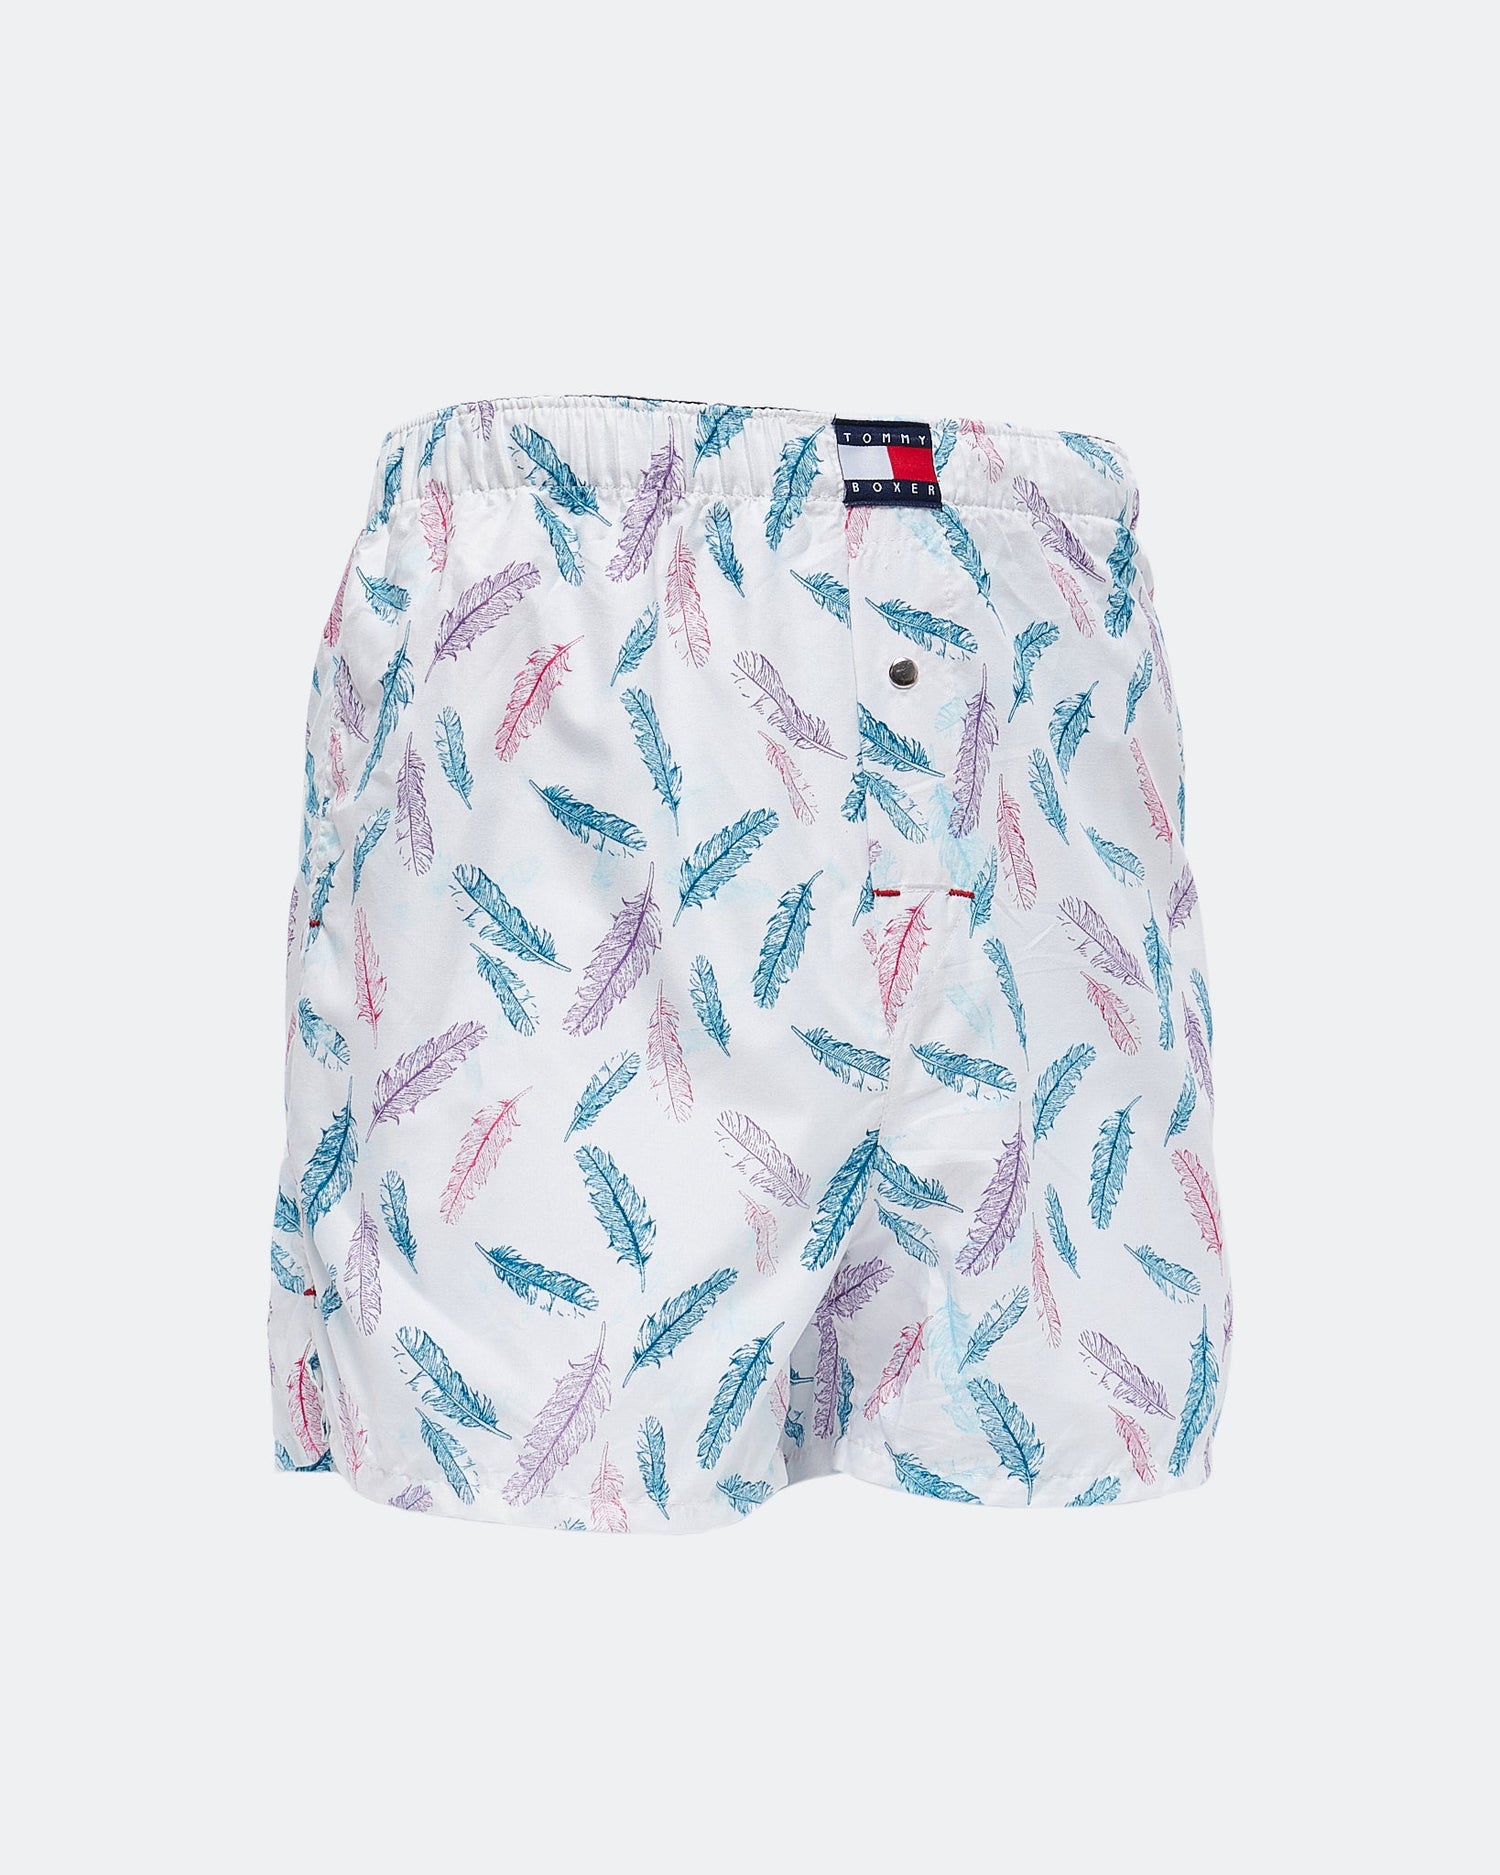 MOI OUTFIT-Leaf Over Printed Men Boxer 6.90